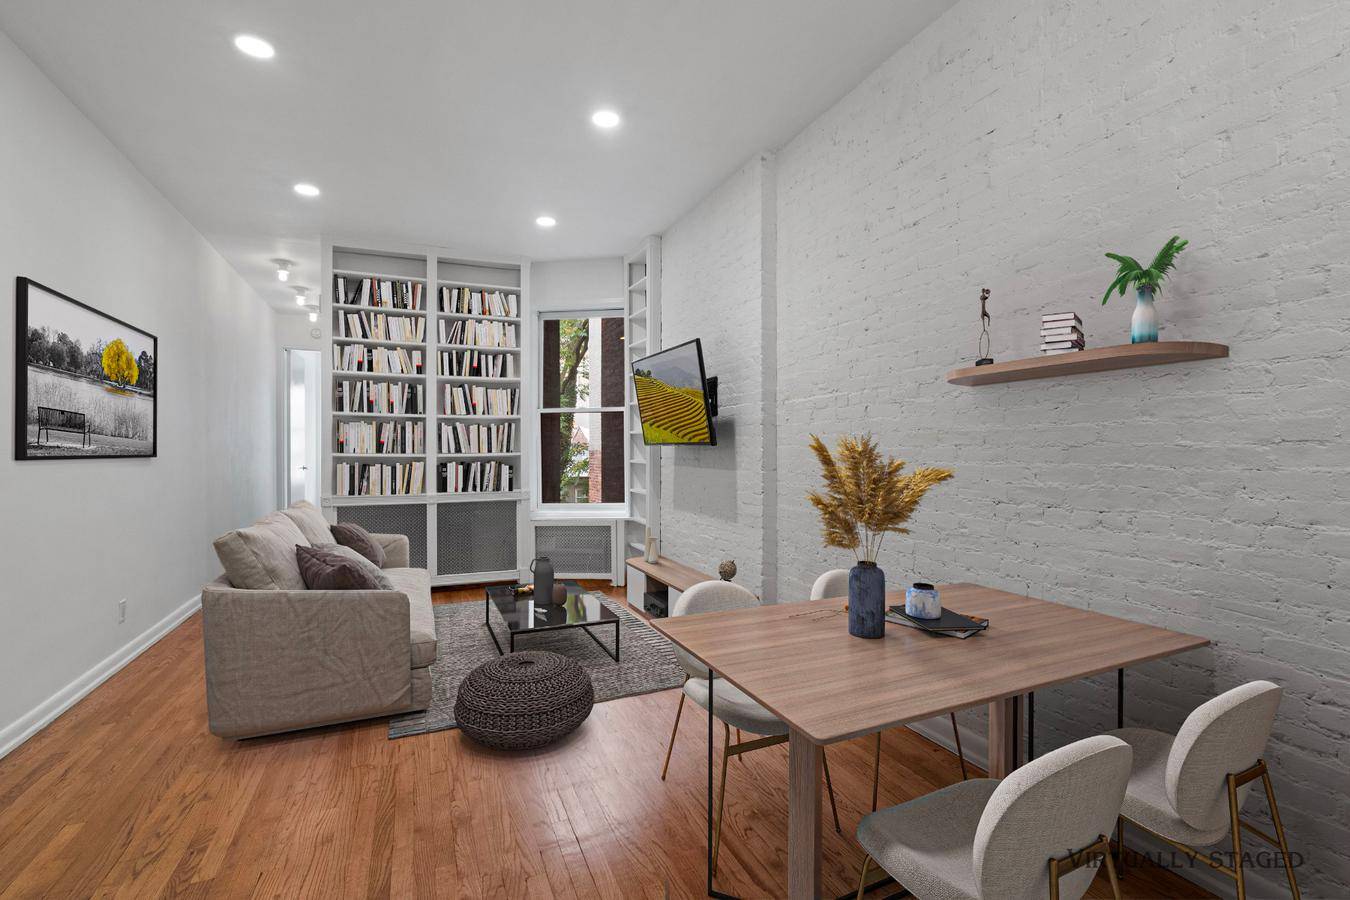 Heres your opportunity to own a beautiful pre war 1 bedroom apartment in the desired West Village !